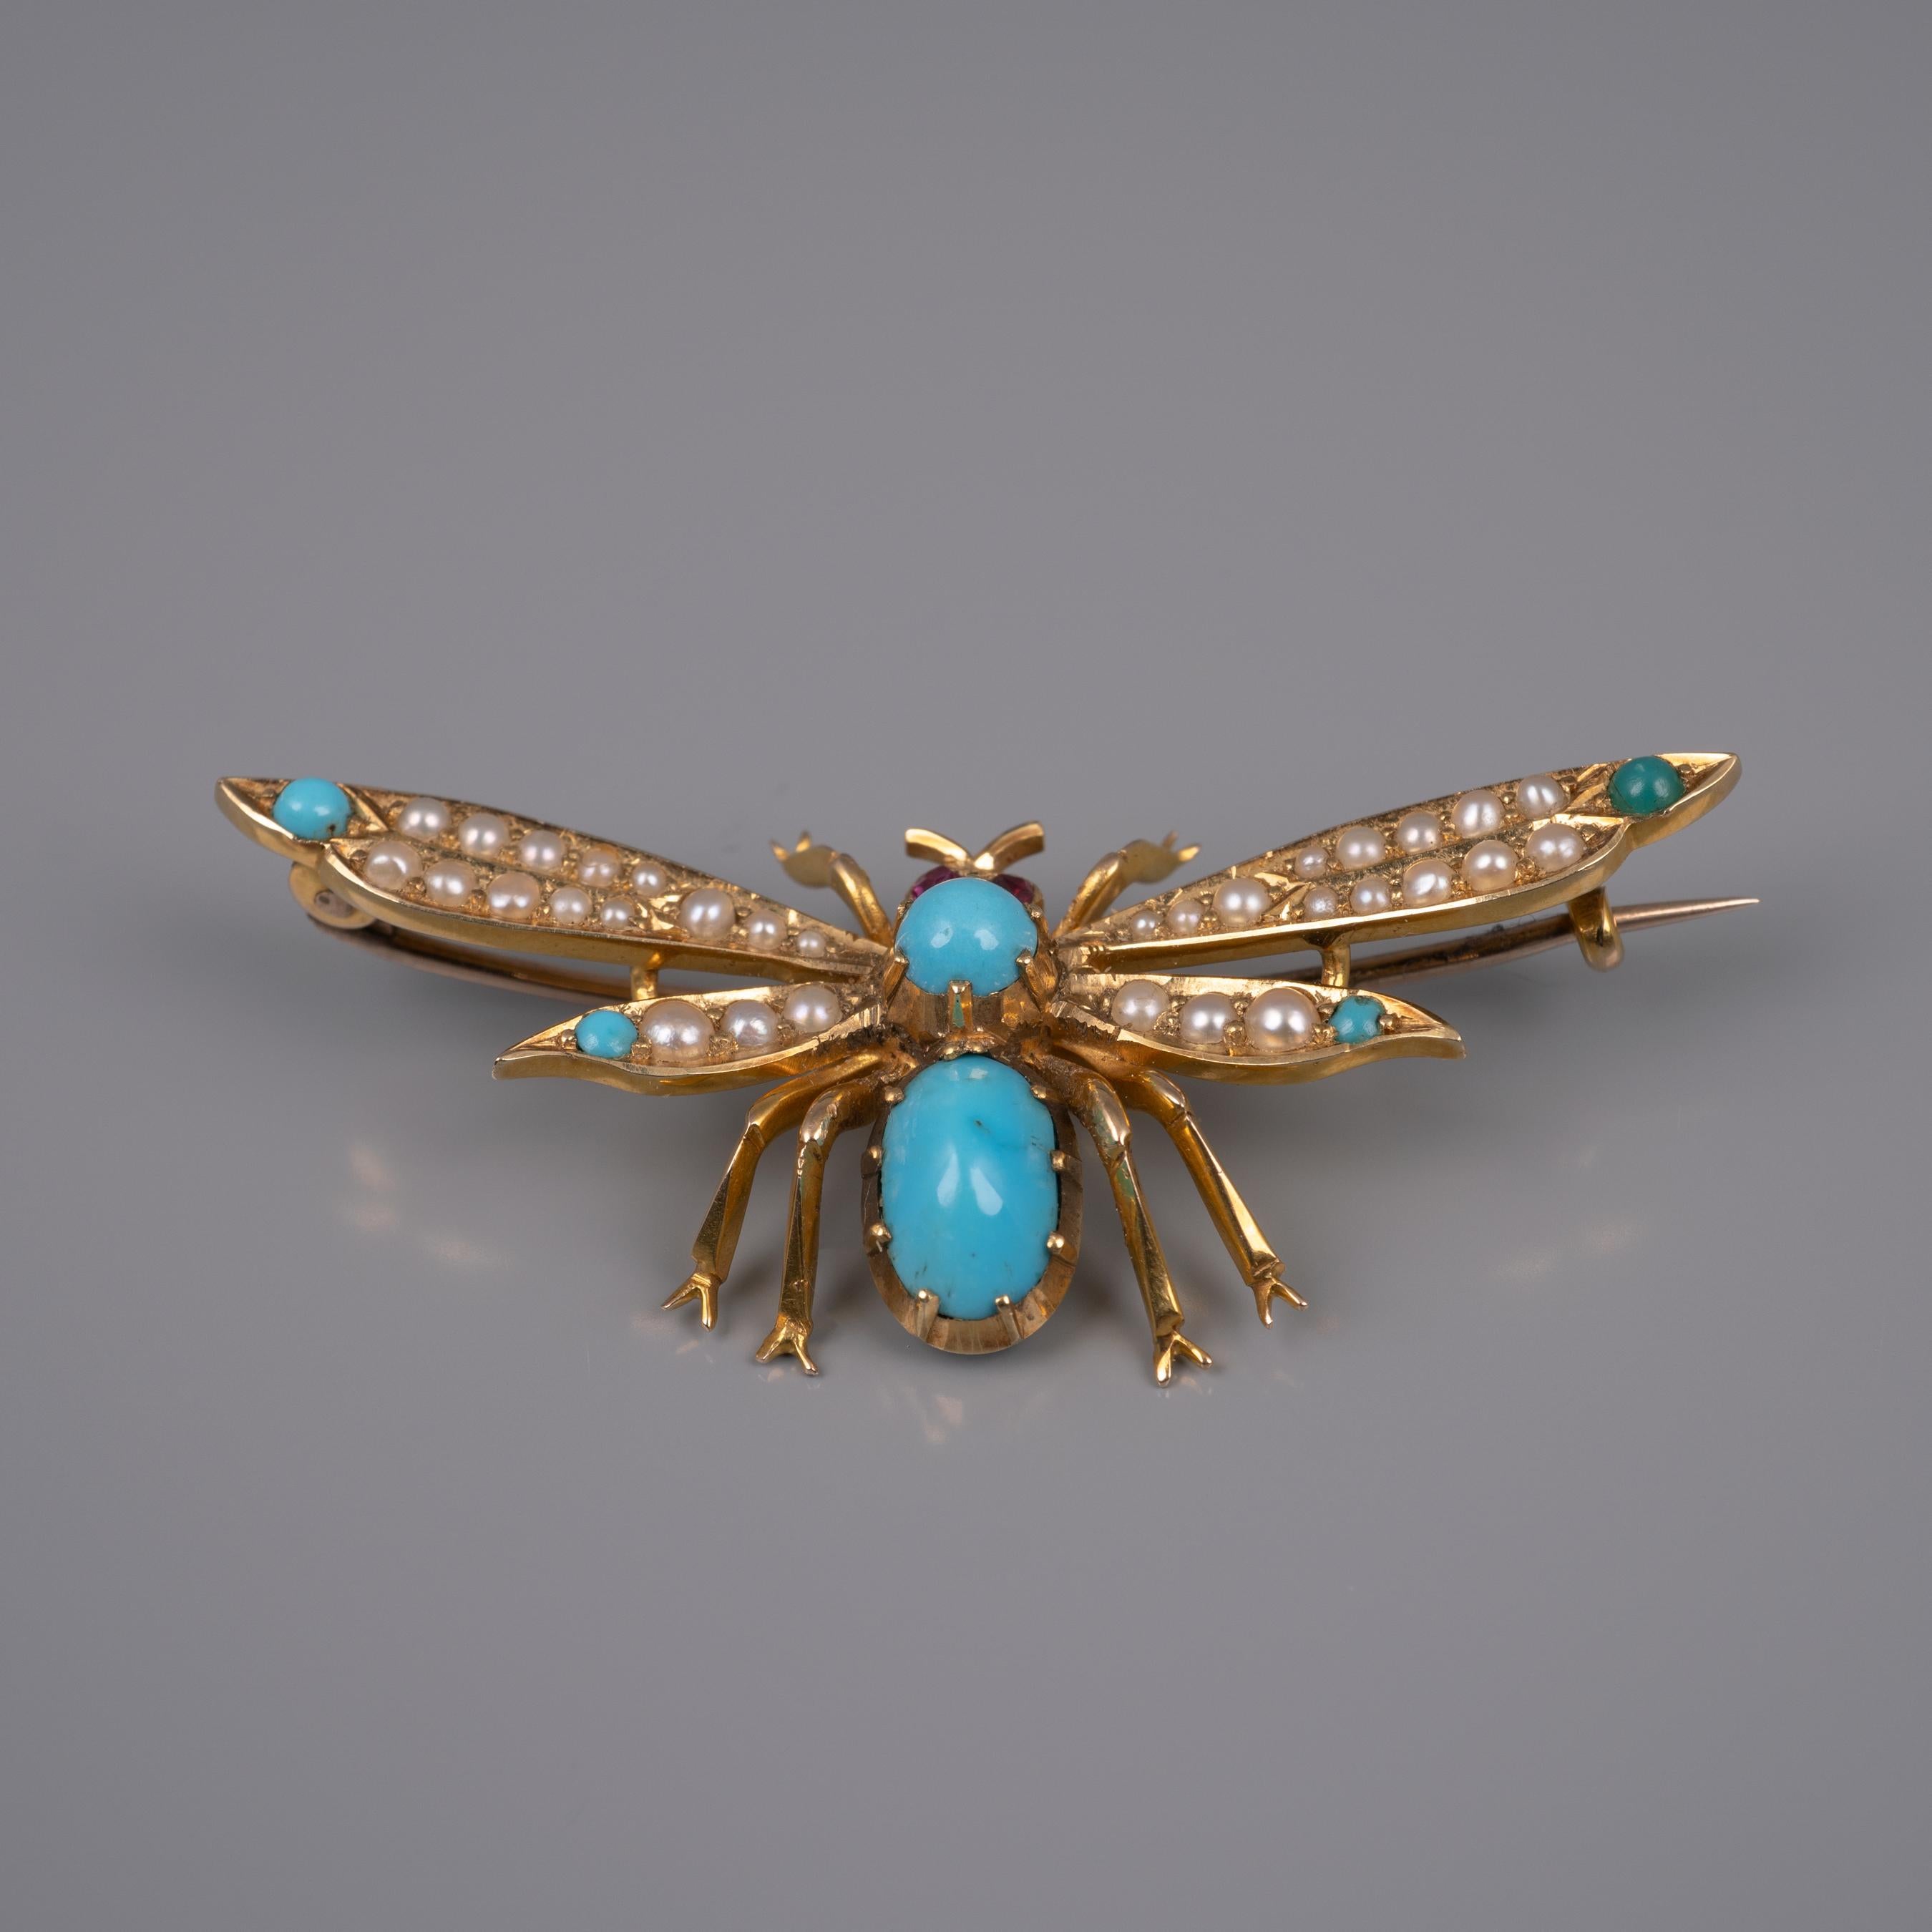 Antique 15 Karat Gold Turquoise Pearl Ruby Winged Insect Brooch, circa 1910 In Good Condition For Sale In Preston, Lancashire